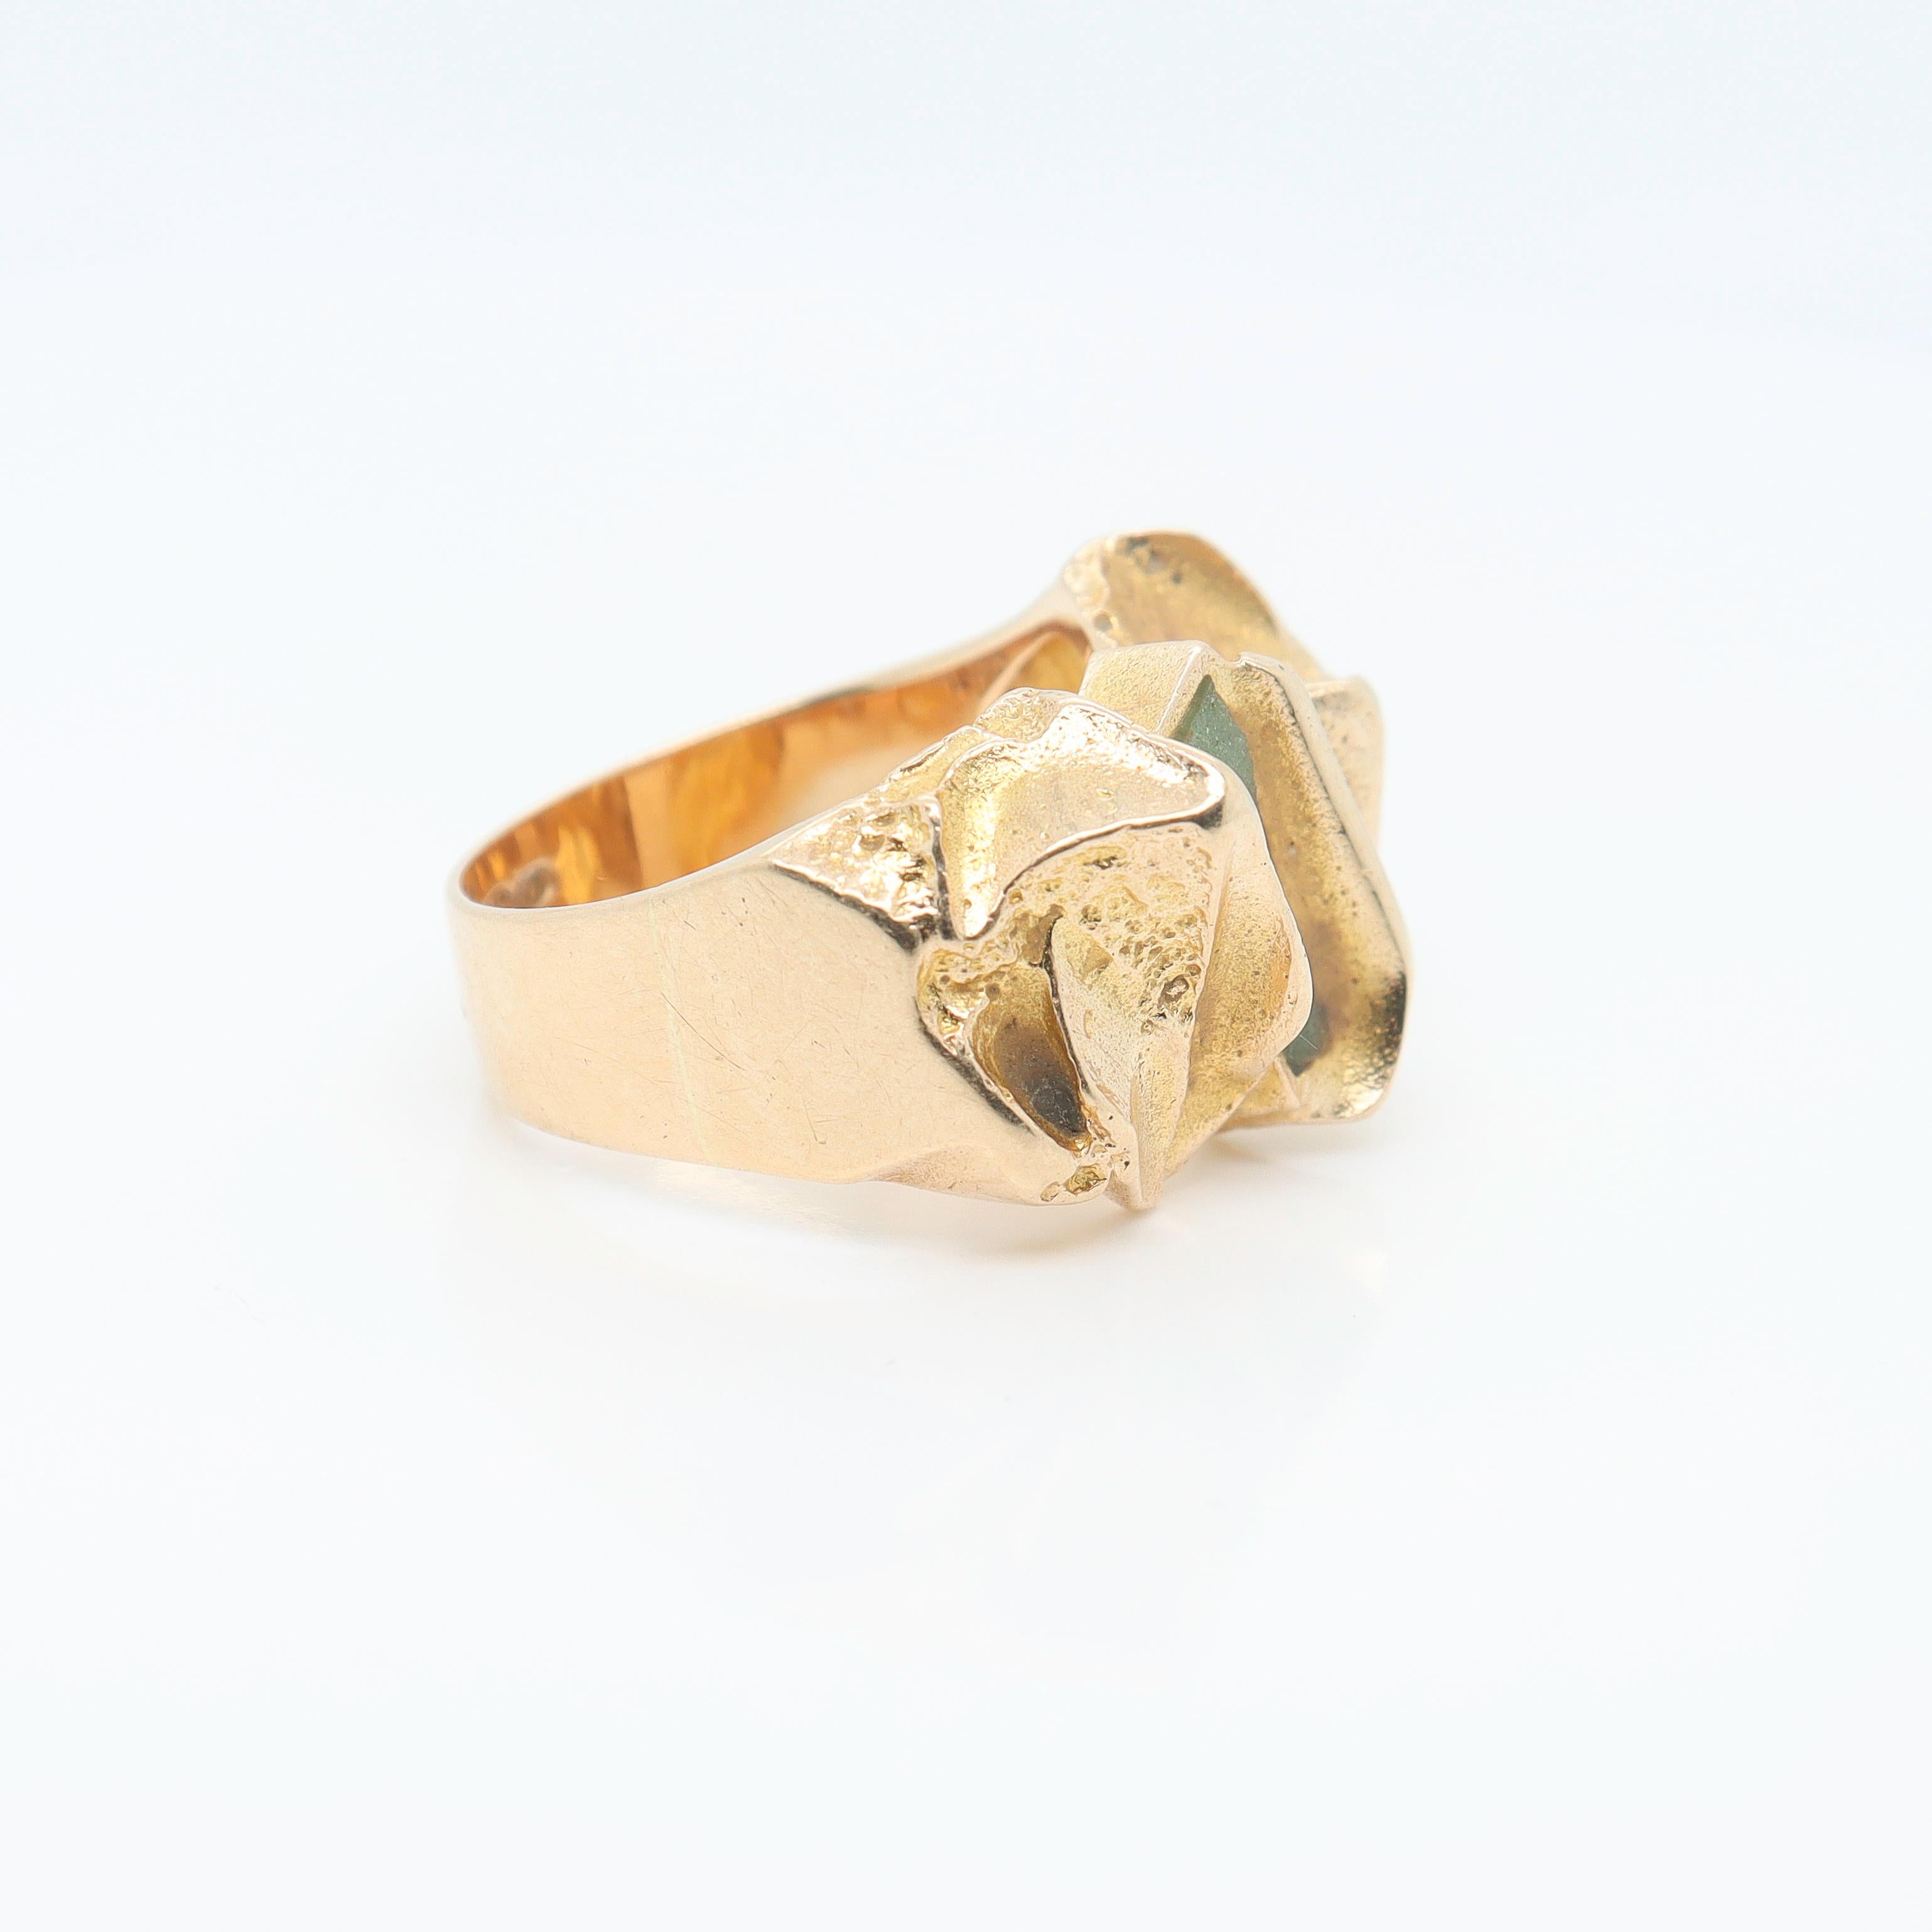 Björn Weckström Scandanavian Mid-Century Modernist 14k Gold and Zoisite Ring In Good Condition For Sale In Philadelphia, PA